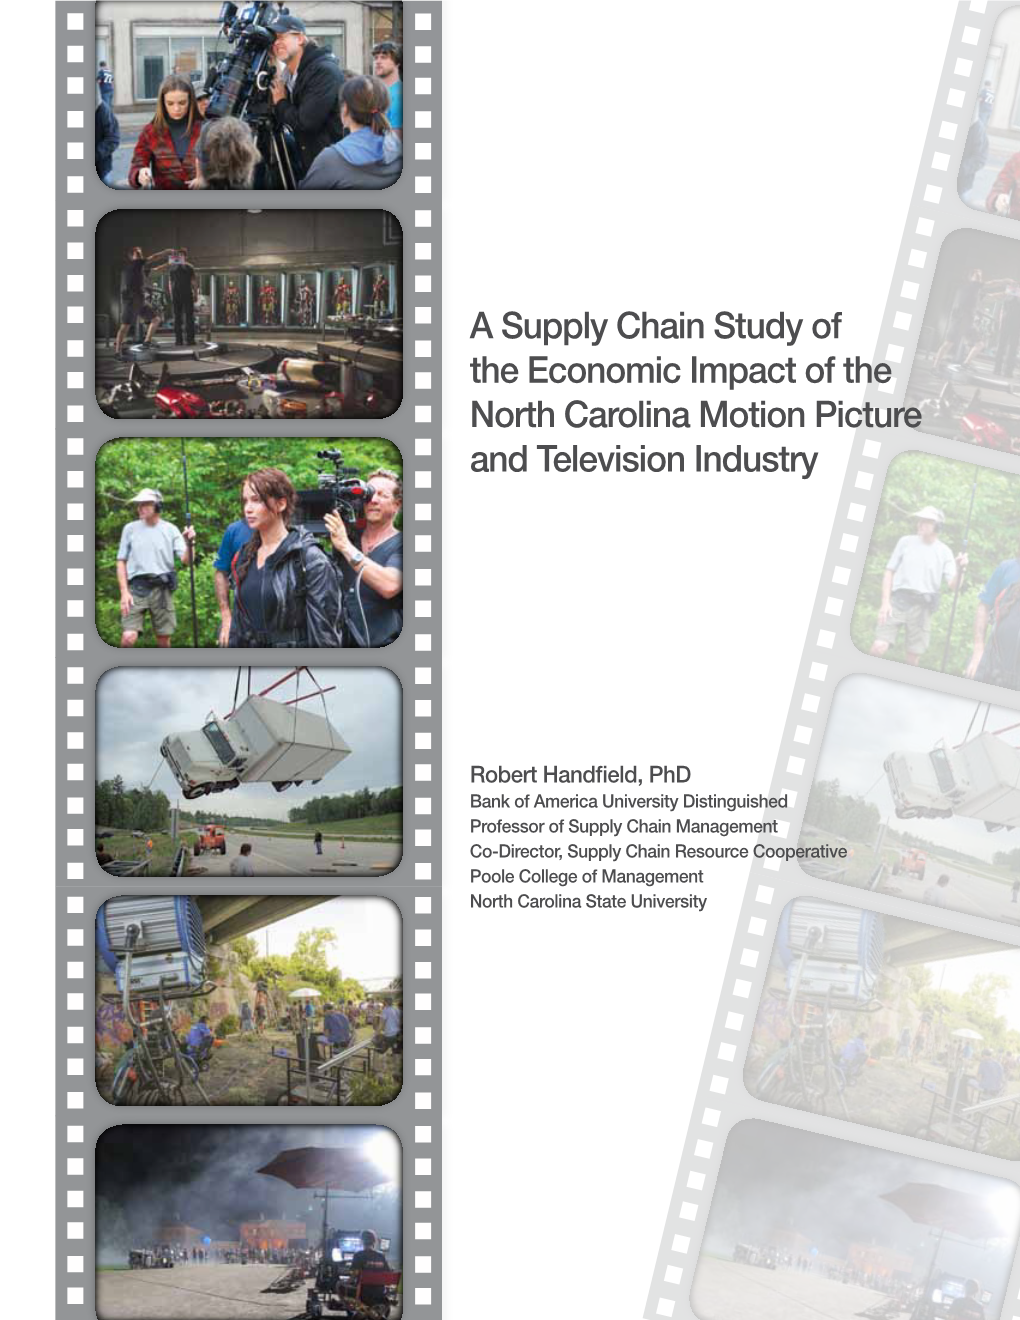 A Supply Chain Study of the Economic Impact of the North Carolina Motion Picture and Television Industry